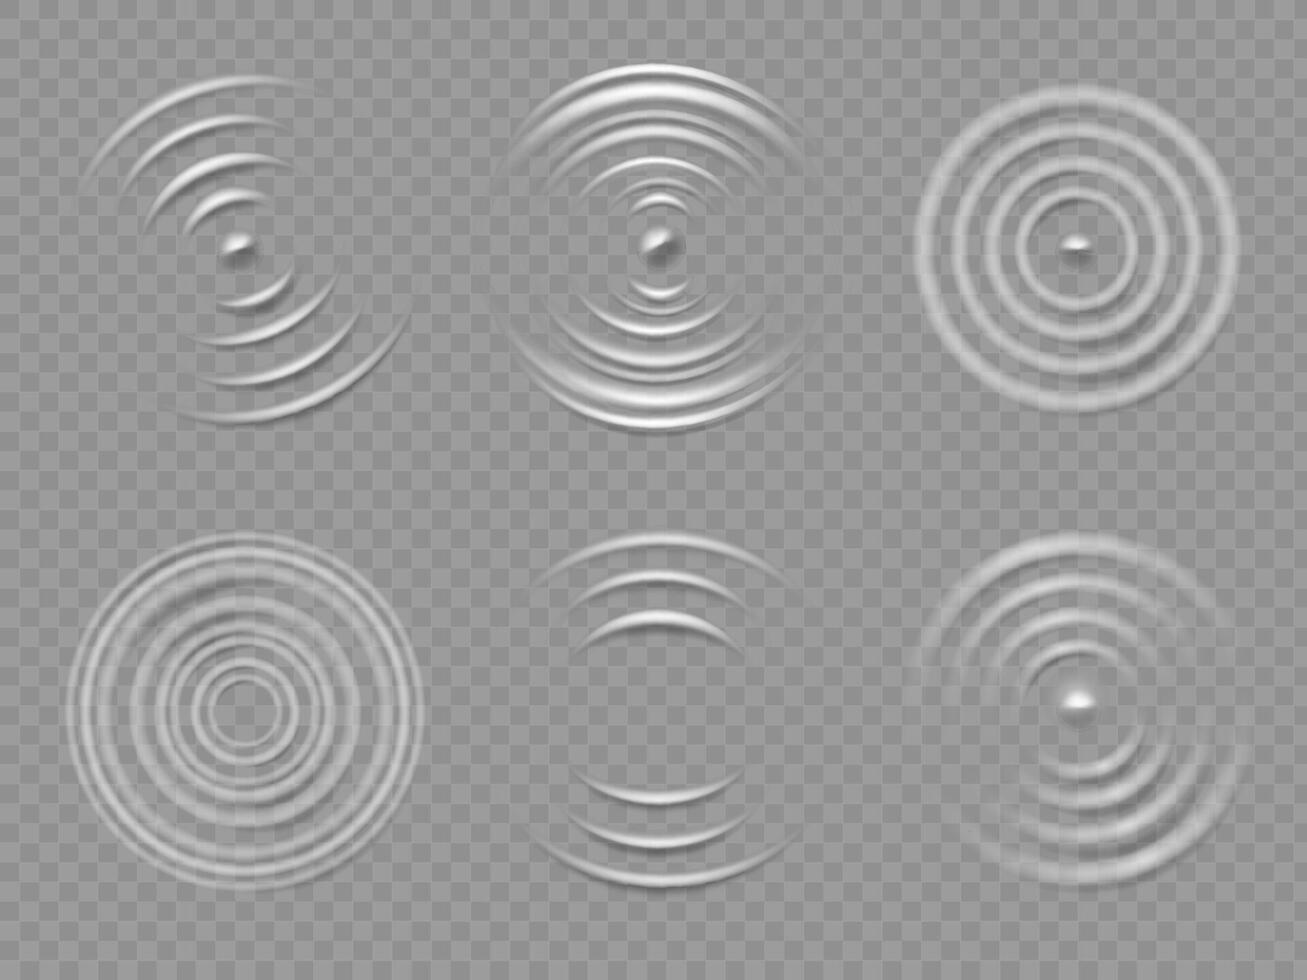 Ripples top view. Realistic water concentric circles and liquid circular waves. Round sound wave splash effects. 3d drop rings vector set